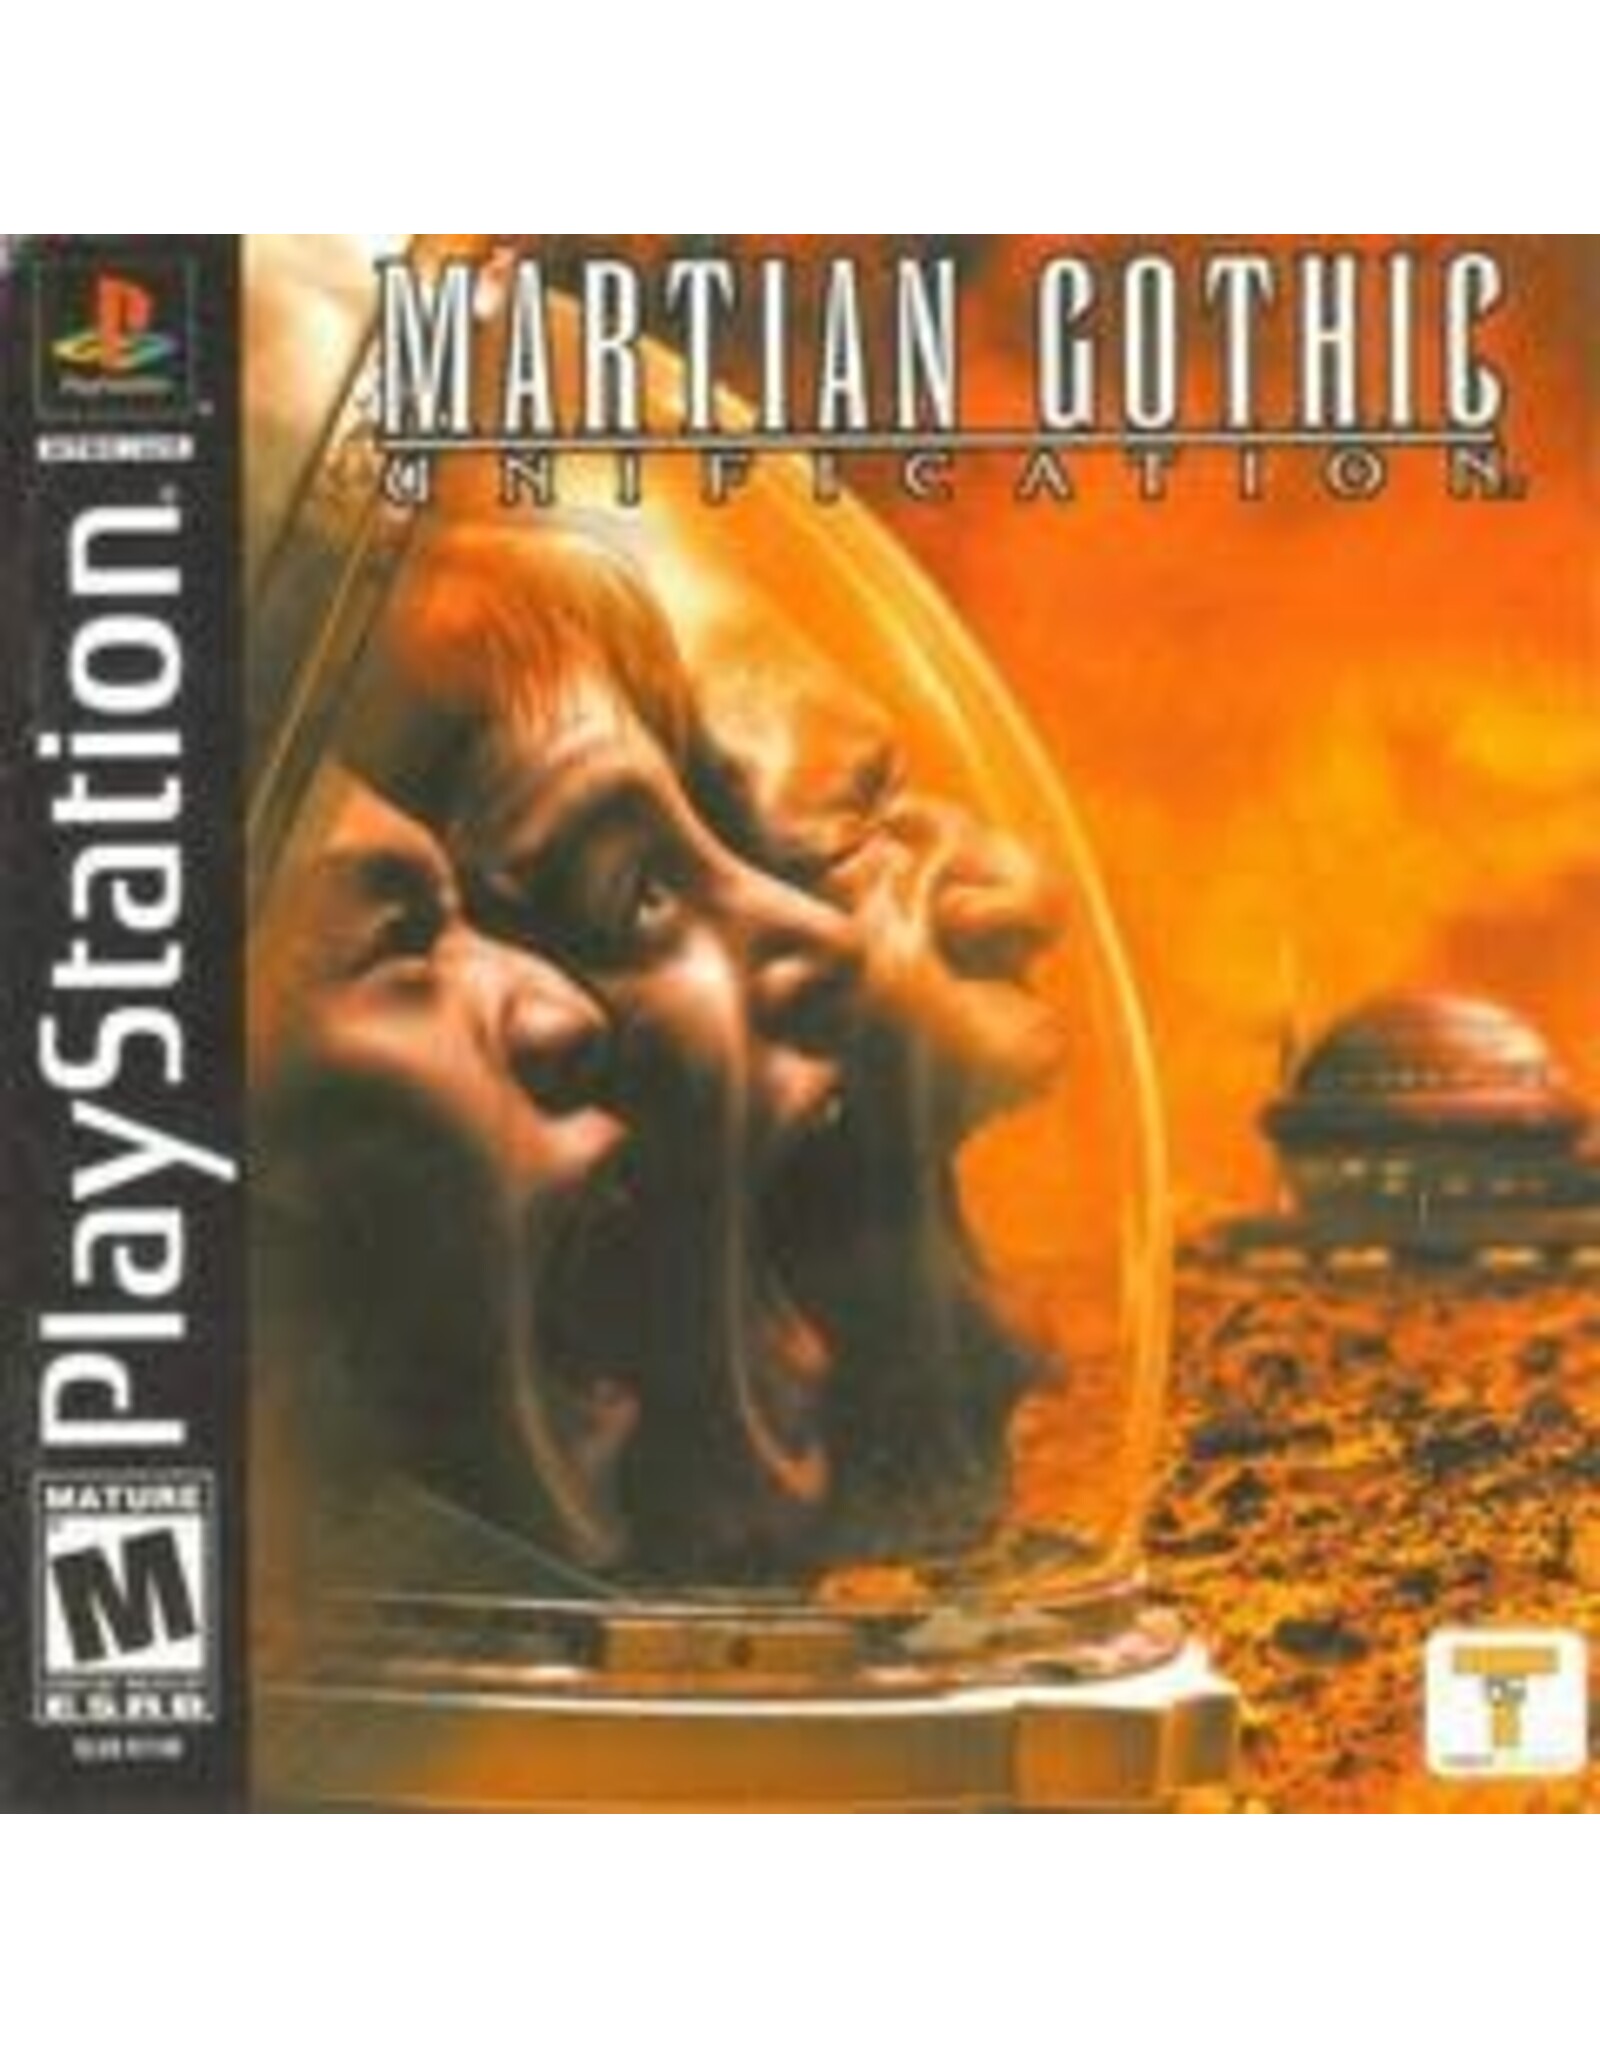 Playstation Martian Gothic Unification (Disc Only)